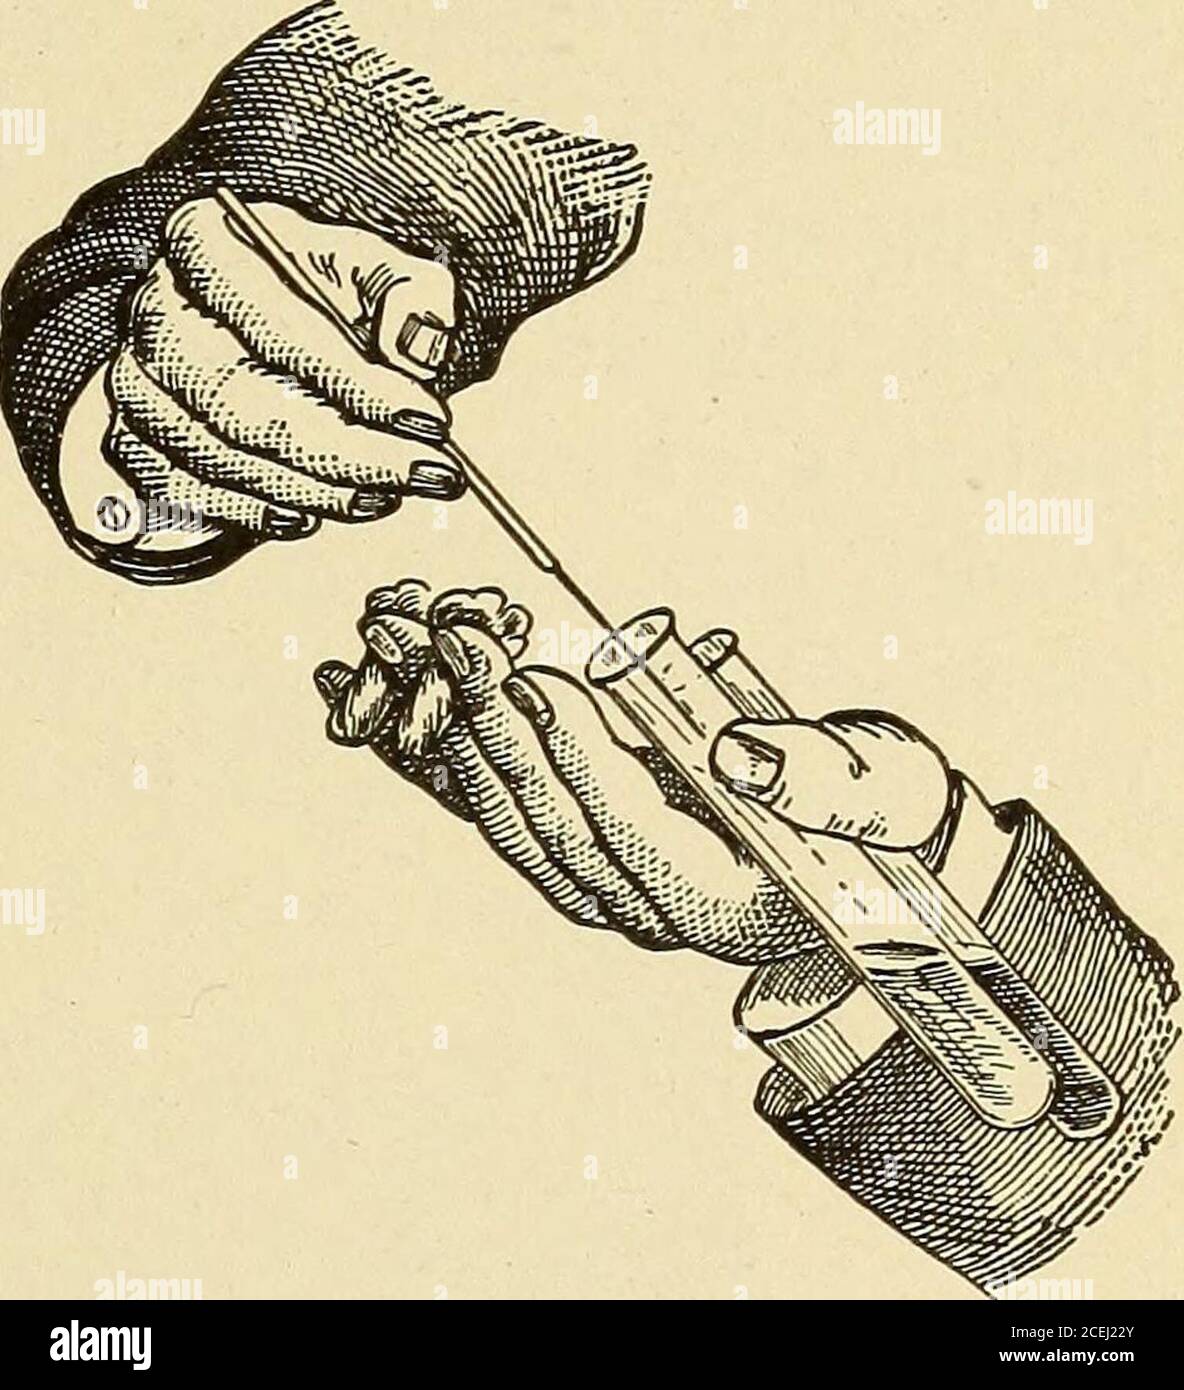 . Pathological technique; a practical manual for workers in pathological histology and bacteriology. g position in such away as to give a good view to the operator of the surface ofthe media in each, while the cotton stoppers are removedand held between the fingers of the same hand (Fig. 19).The object of holding the tubes in a slanting position is tooffer less chance of contamination from bacteria gaining en-trance to the culture-medium from the air. The platinum wire, which is manipulated by the righthand, is first sterilized by holding in the Bunsen flame untilit glows, and then cooled by c Stock Photo